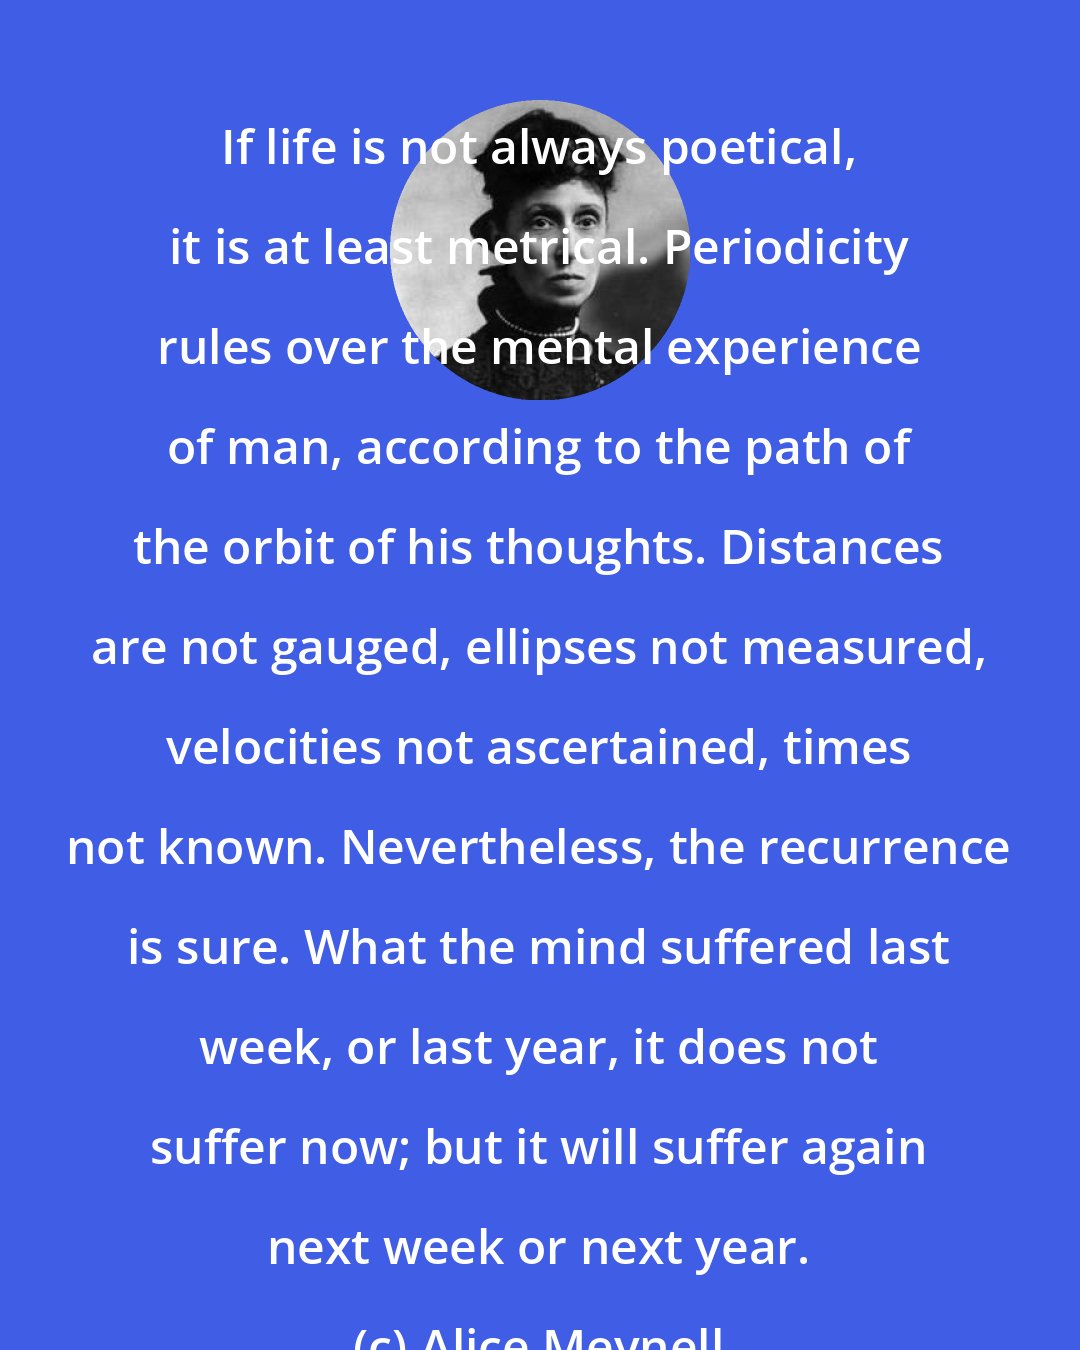 Alice Meynell: If life is not always poetical, it is at least metrical. Periodicity rules over the mental experience of man, according to the path of the orbit of his thoughts. Distances are not gauged, ellipses not measured, velocities not ascertained, times not known. Nevertheless, the recurrence is sure. What the mind suffered last week, or last year, it does not suffer now; but it will suffer again next week or next year.